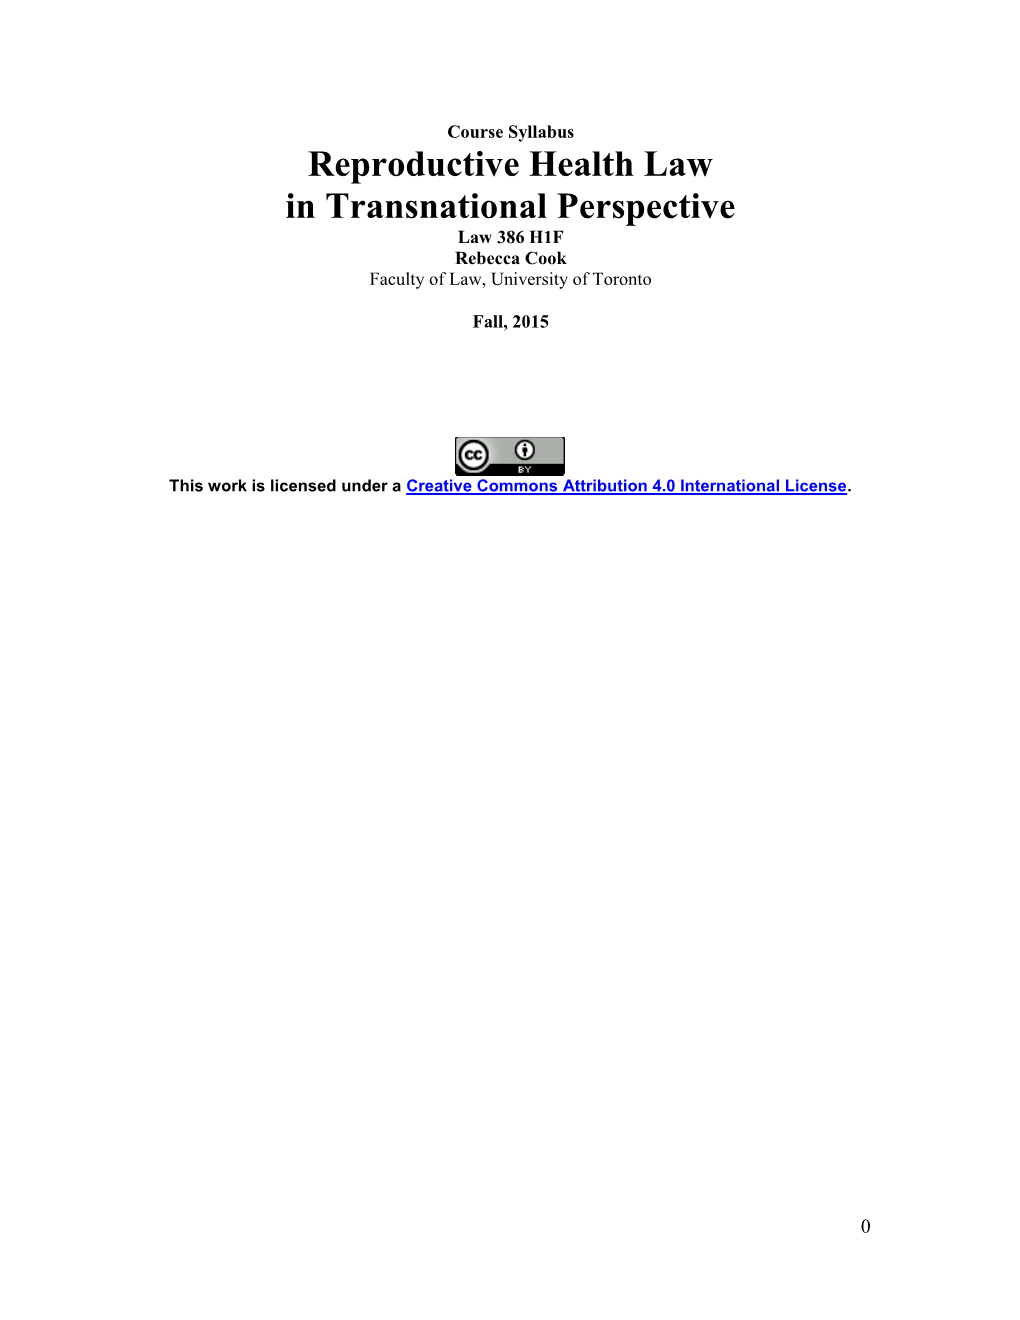 Reproductive Health Law in Transnational Perspective-2014